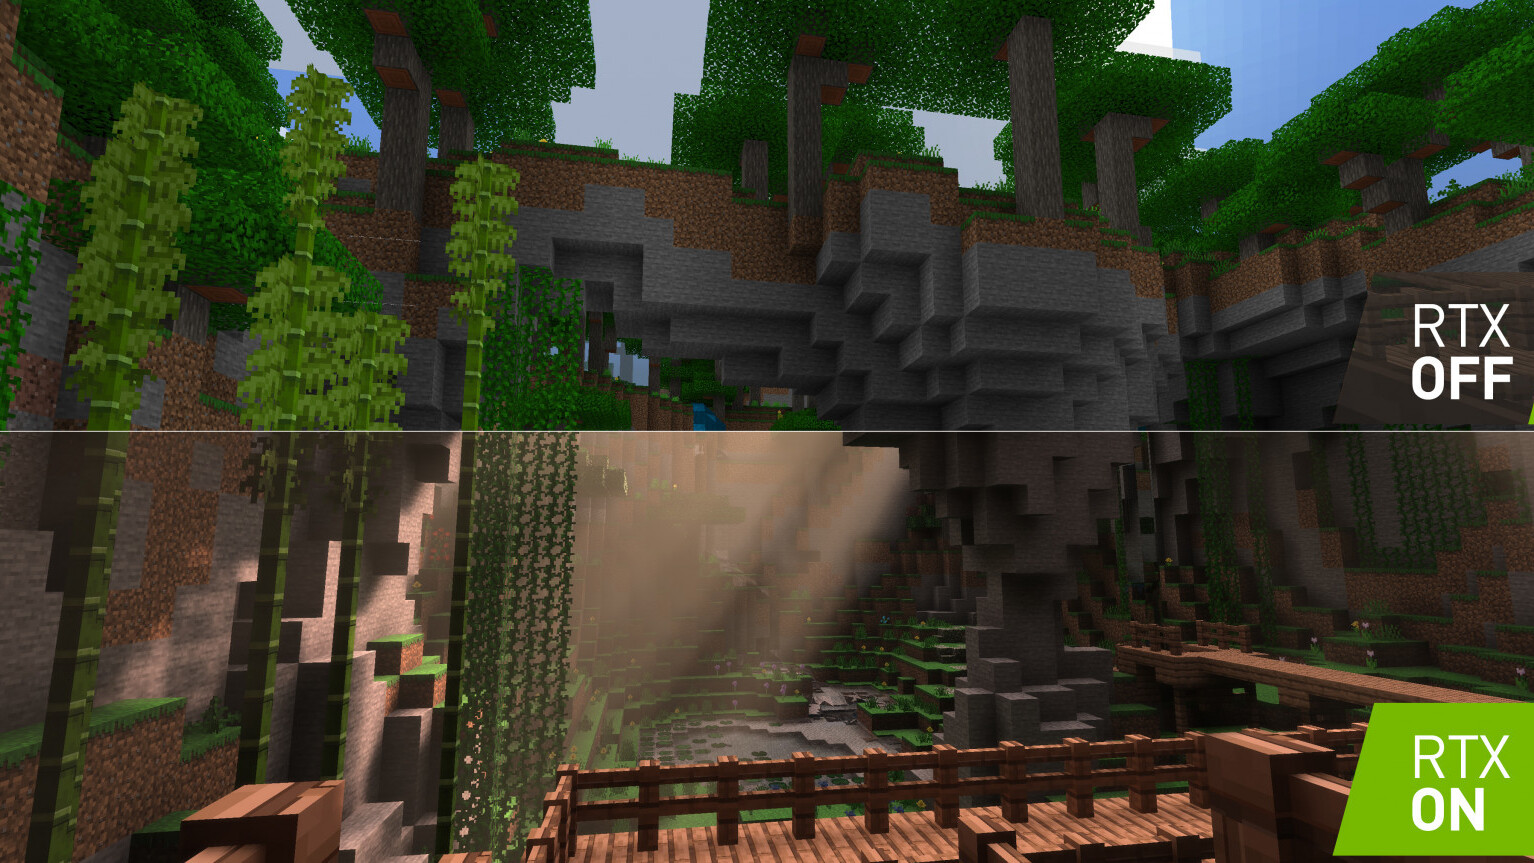 Minecraft with ray tracing looks so good I actually want to play it